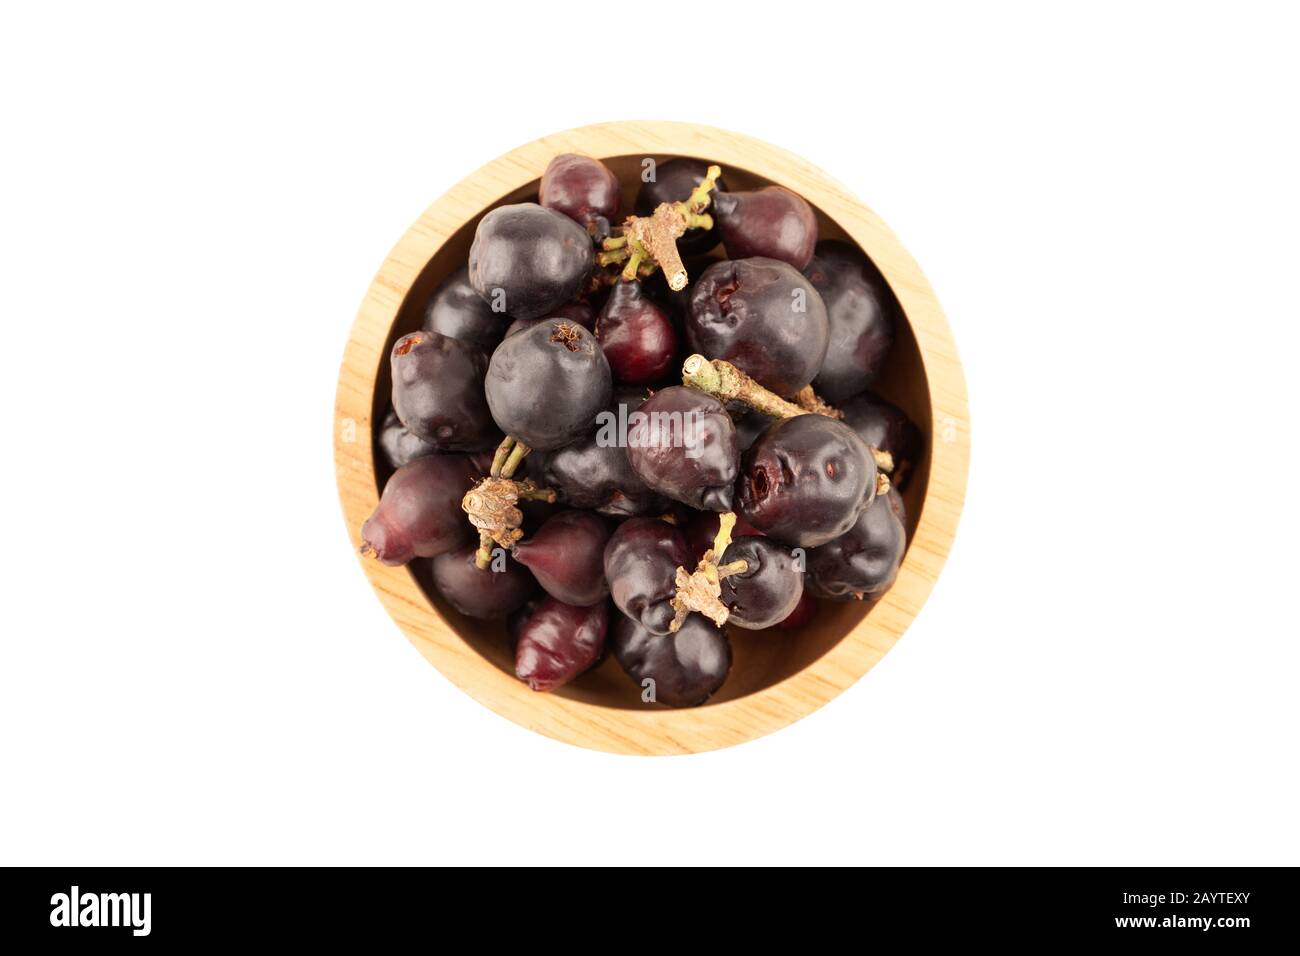 Top view of Syzygium cumini, black plum, jamun or Syzygium cumini in wooden bowl isolated on white background with clipping path Stock Photo